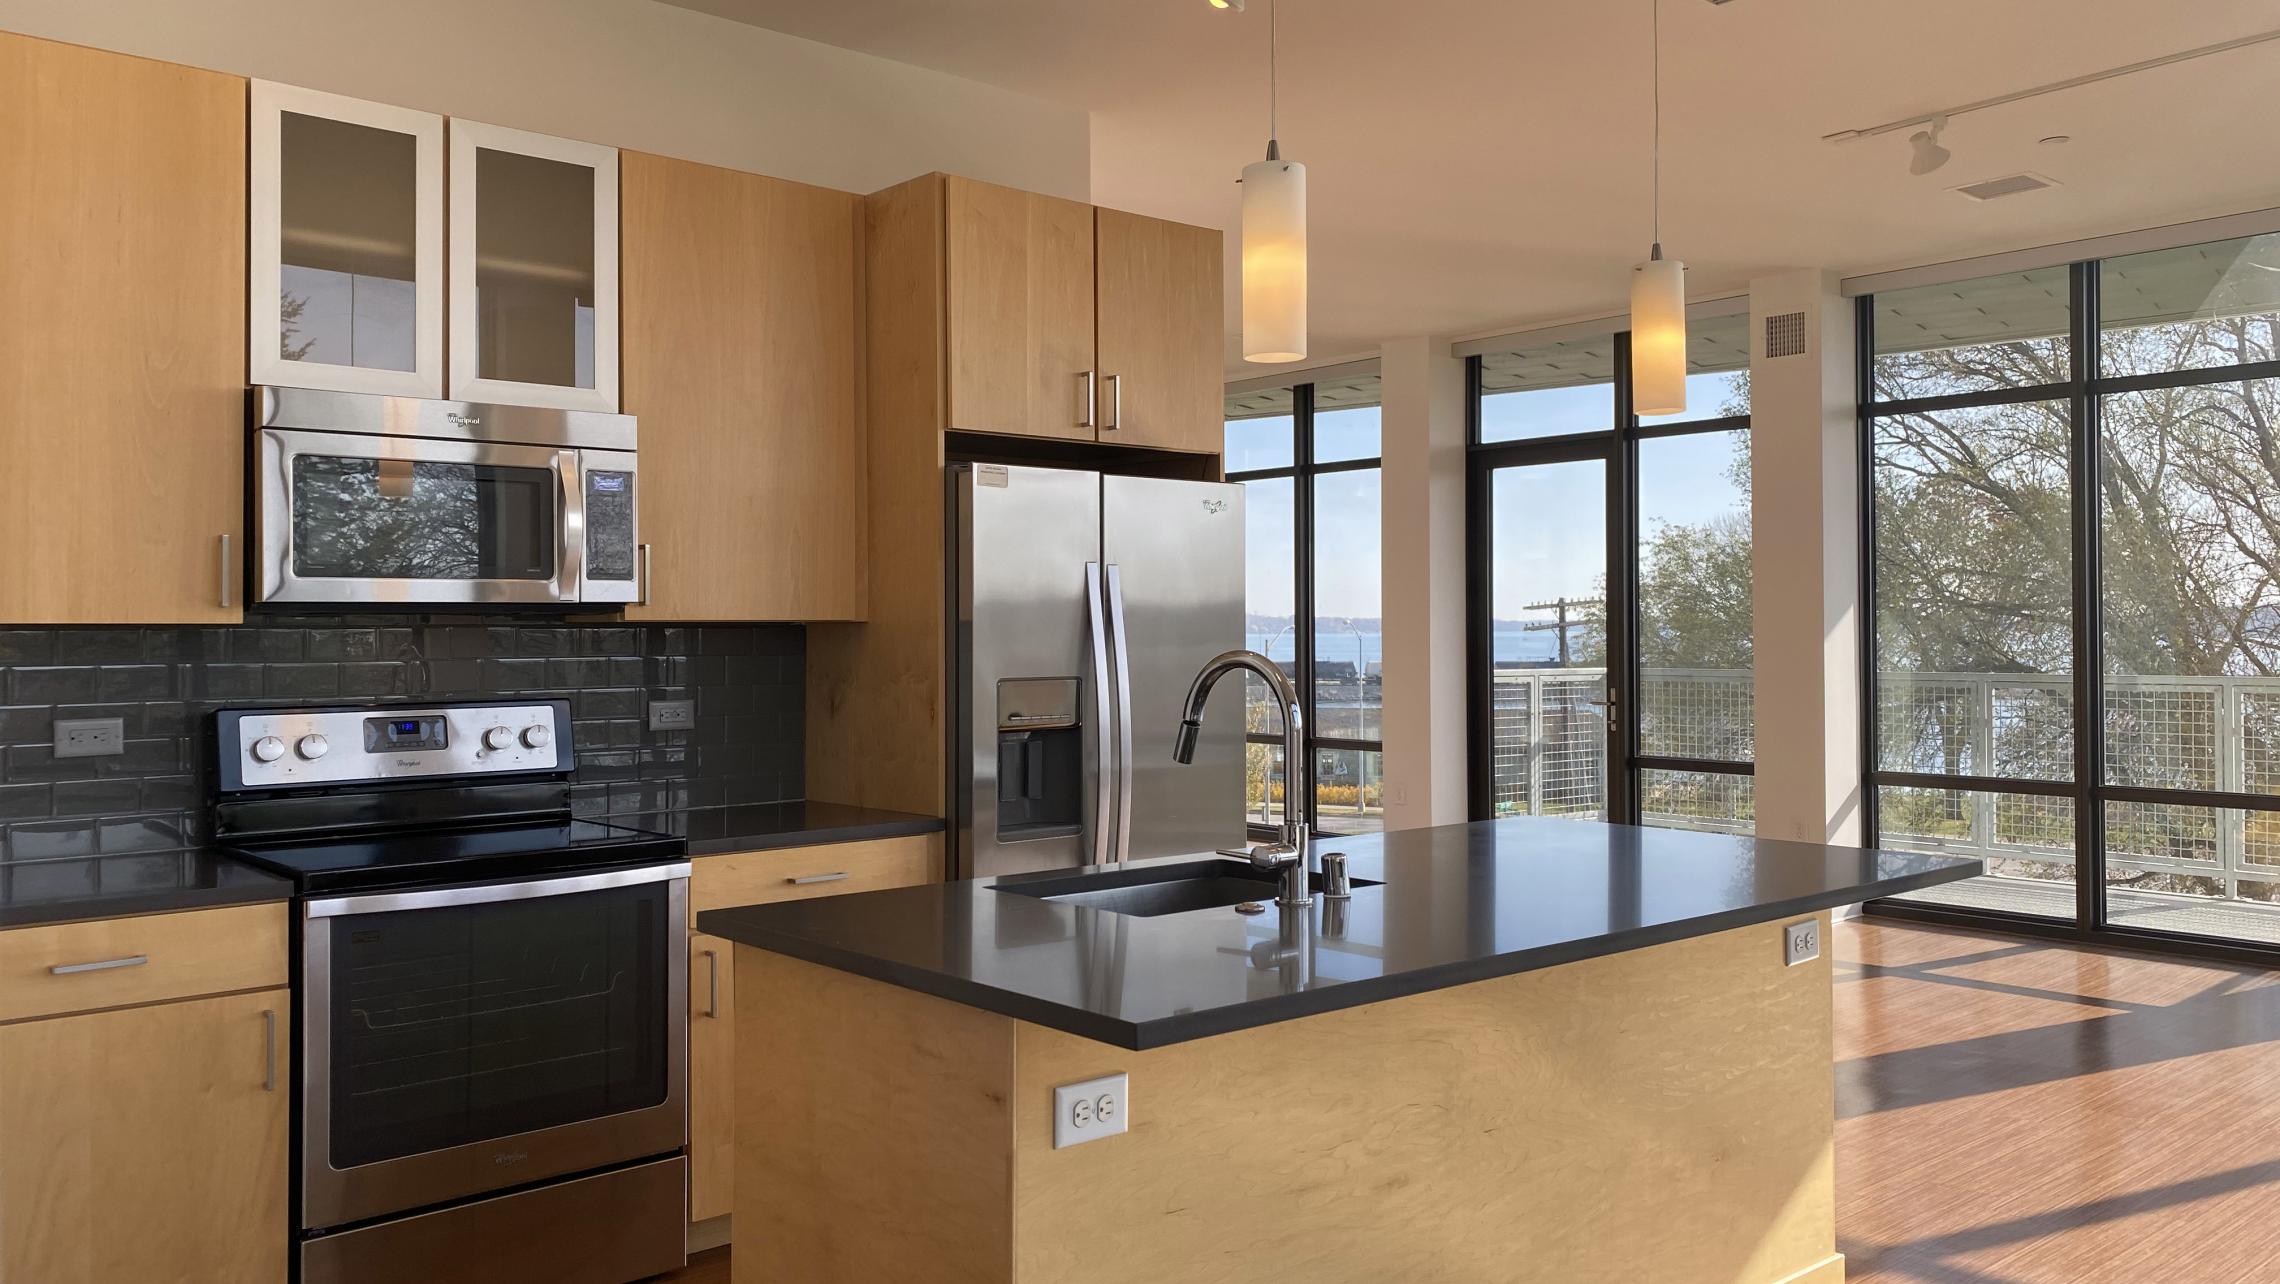 SEVEN27-The-Yards-Apartment-340-Two-Bedroom-Windows-Natural-Light-Stunning-Lake-View-Cats-Dogs-Balcony-Lounge-Modern-Upscale-Luxury-Kitchen-Bathroom-Design-Downtown-MadisonSEVEN27-The-Yards-Apartment-340-Two-Bedroom-Windows-Natural-Light-Stunning-Lake-Vie